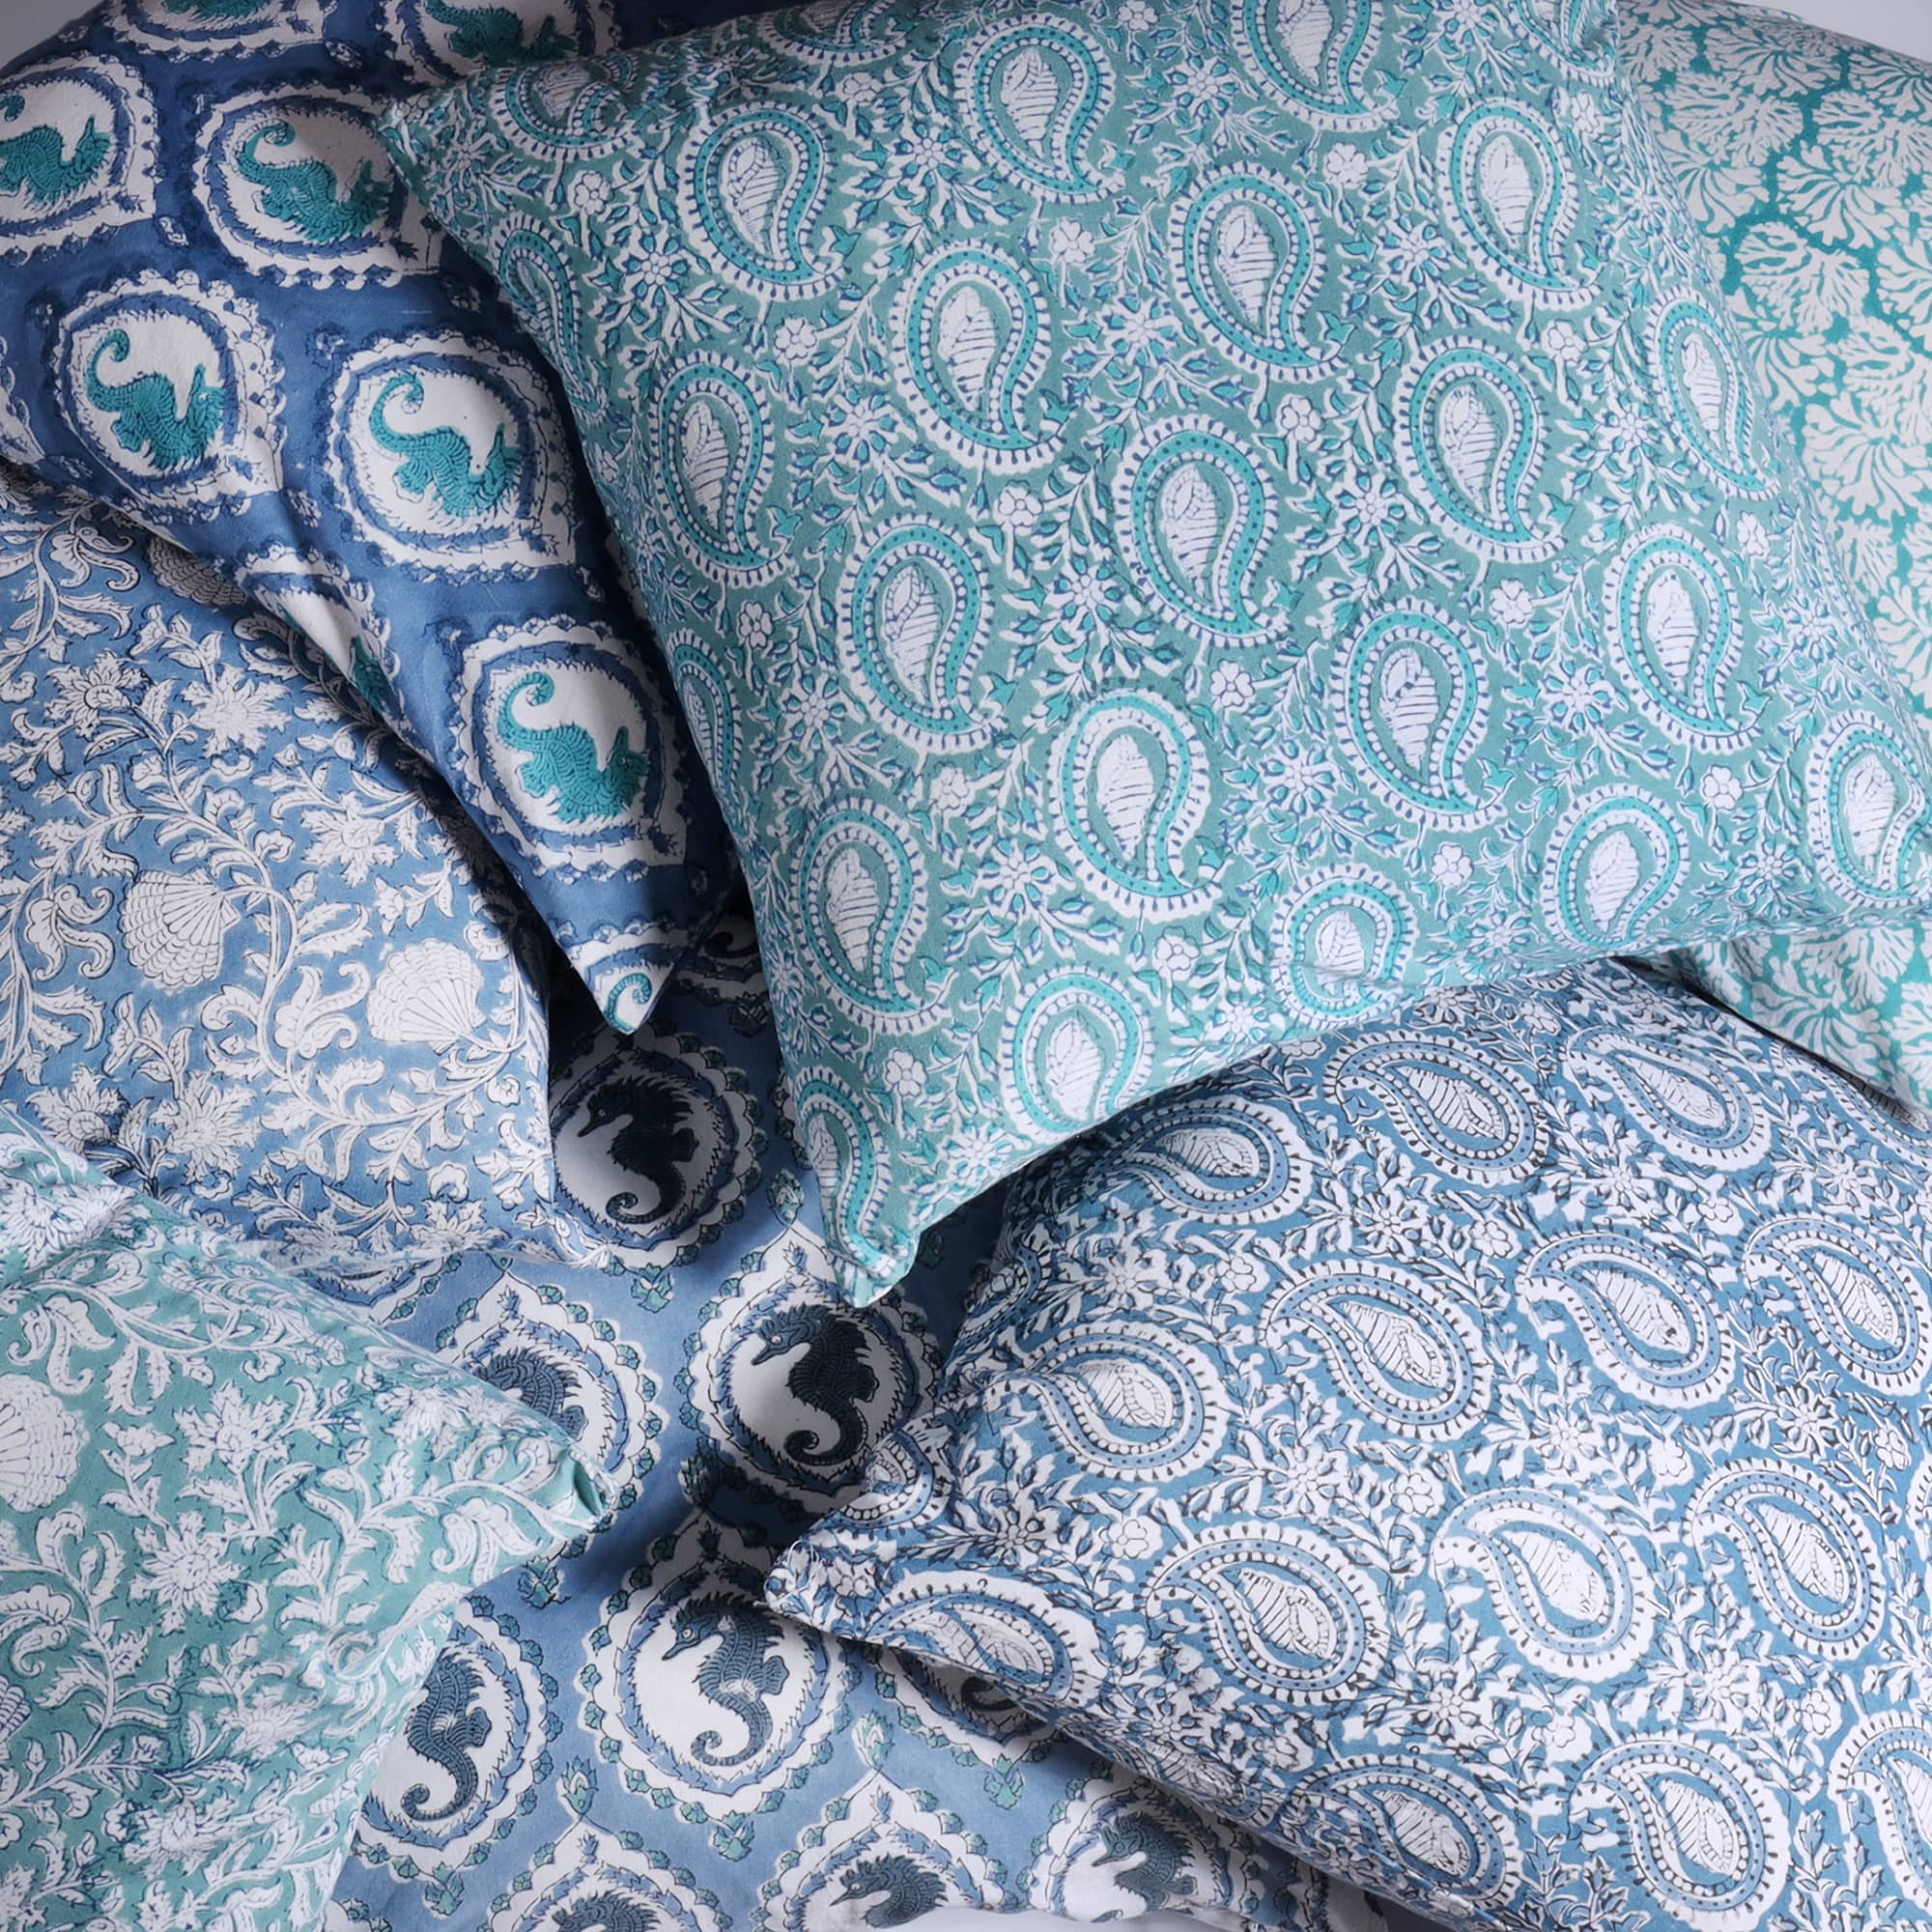 Azure Paisley Shell cushion which is Hand block printed fabric on a pile of other Hand block printed cushions